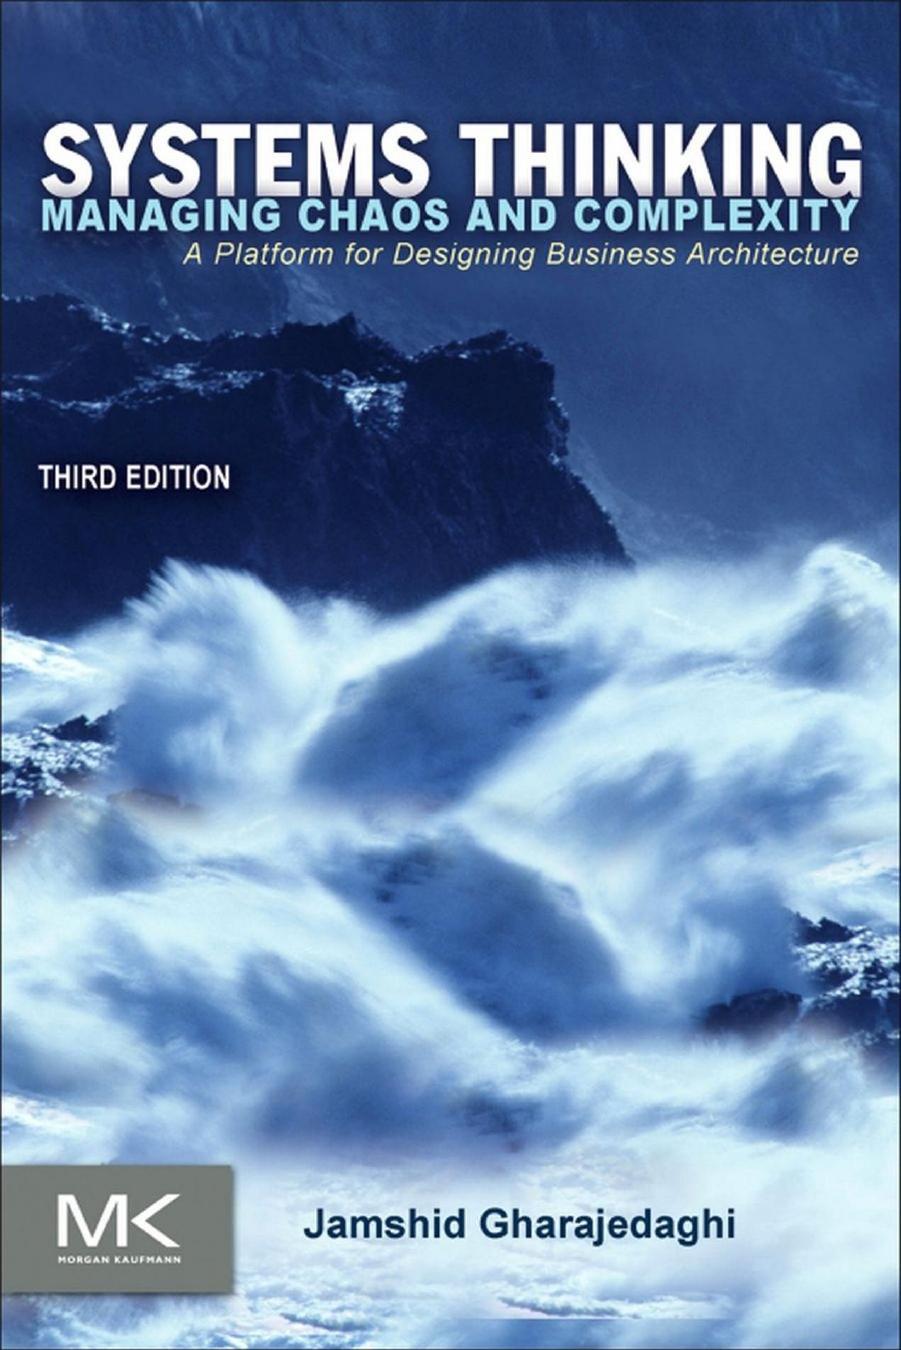 Systems Thinking, Third Edition Managing Chaos and Complexity A Platform for Designing Business Architecture (Jamshid Gharajedaghi) (z-lib.org)